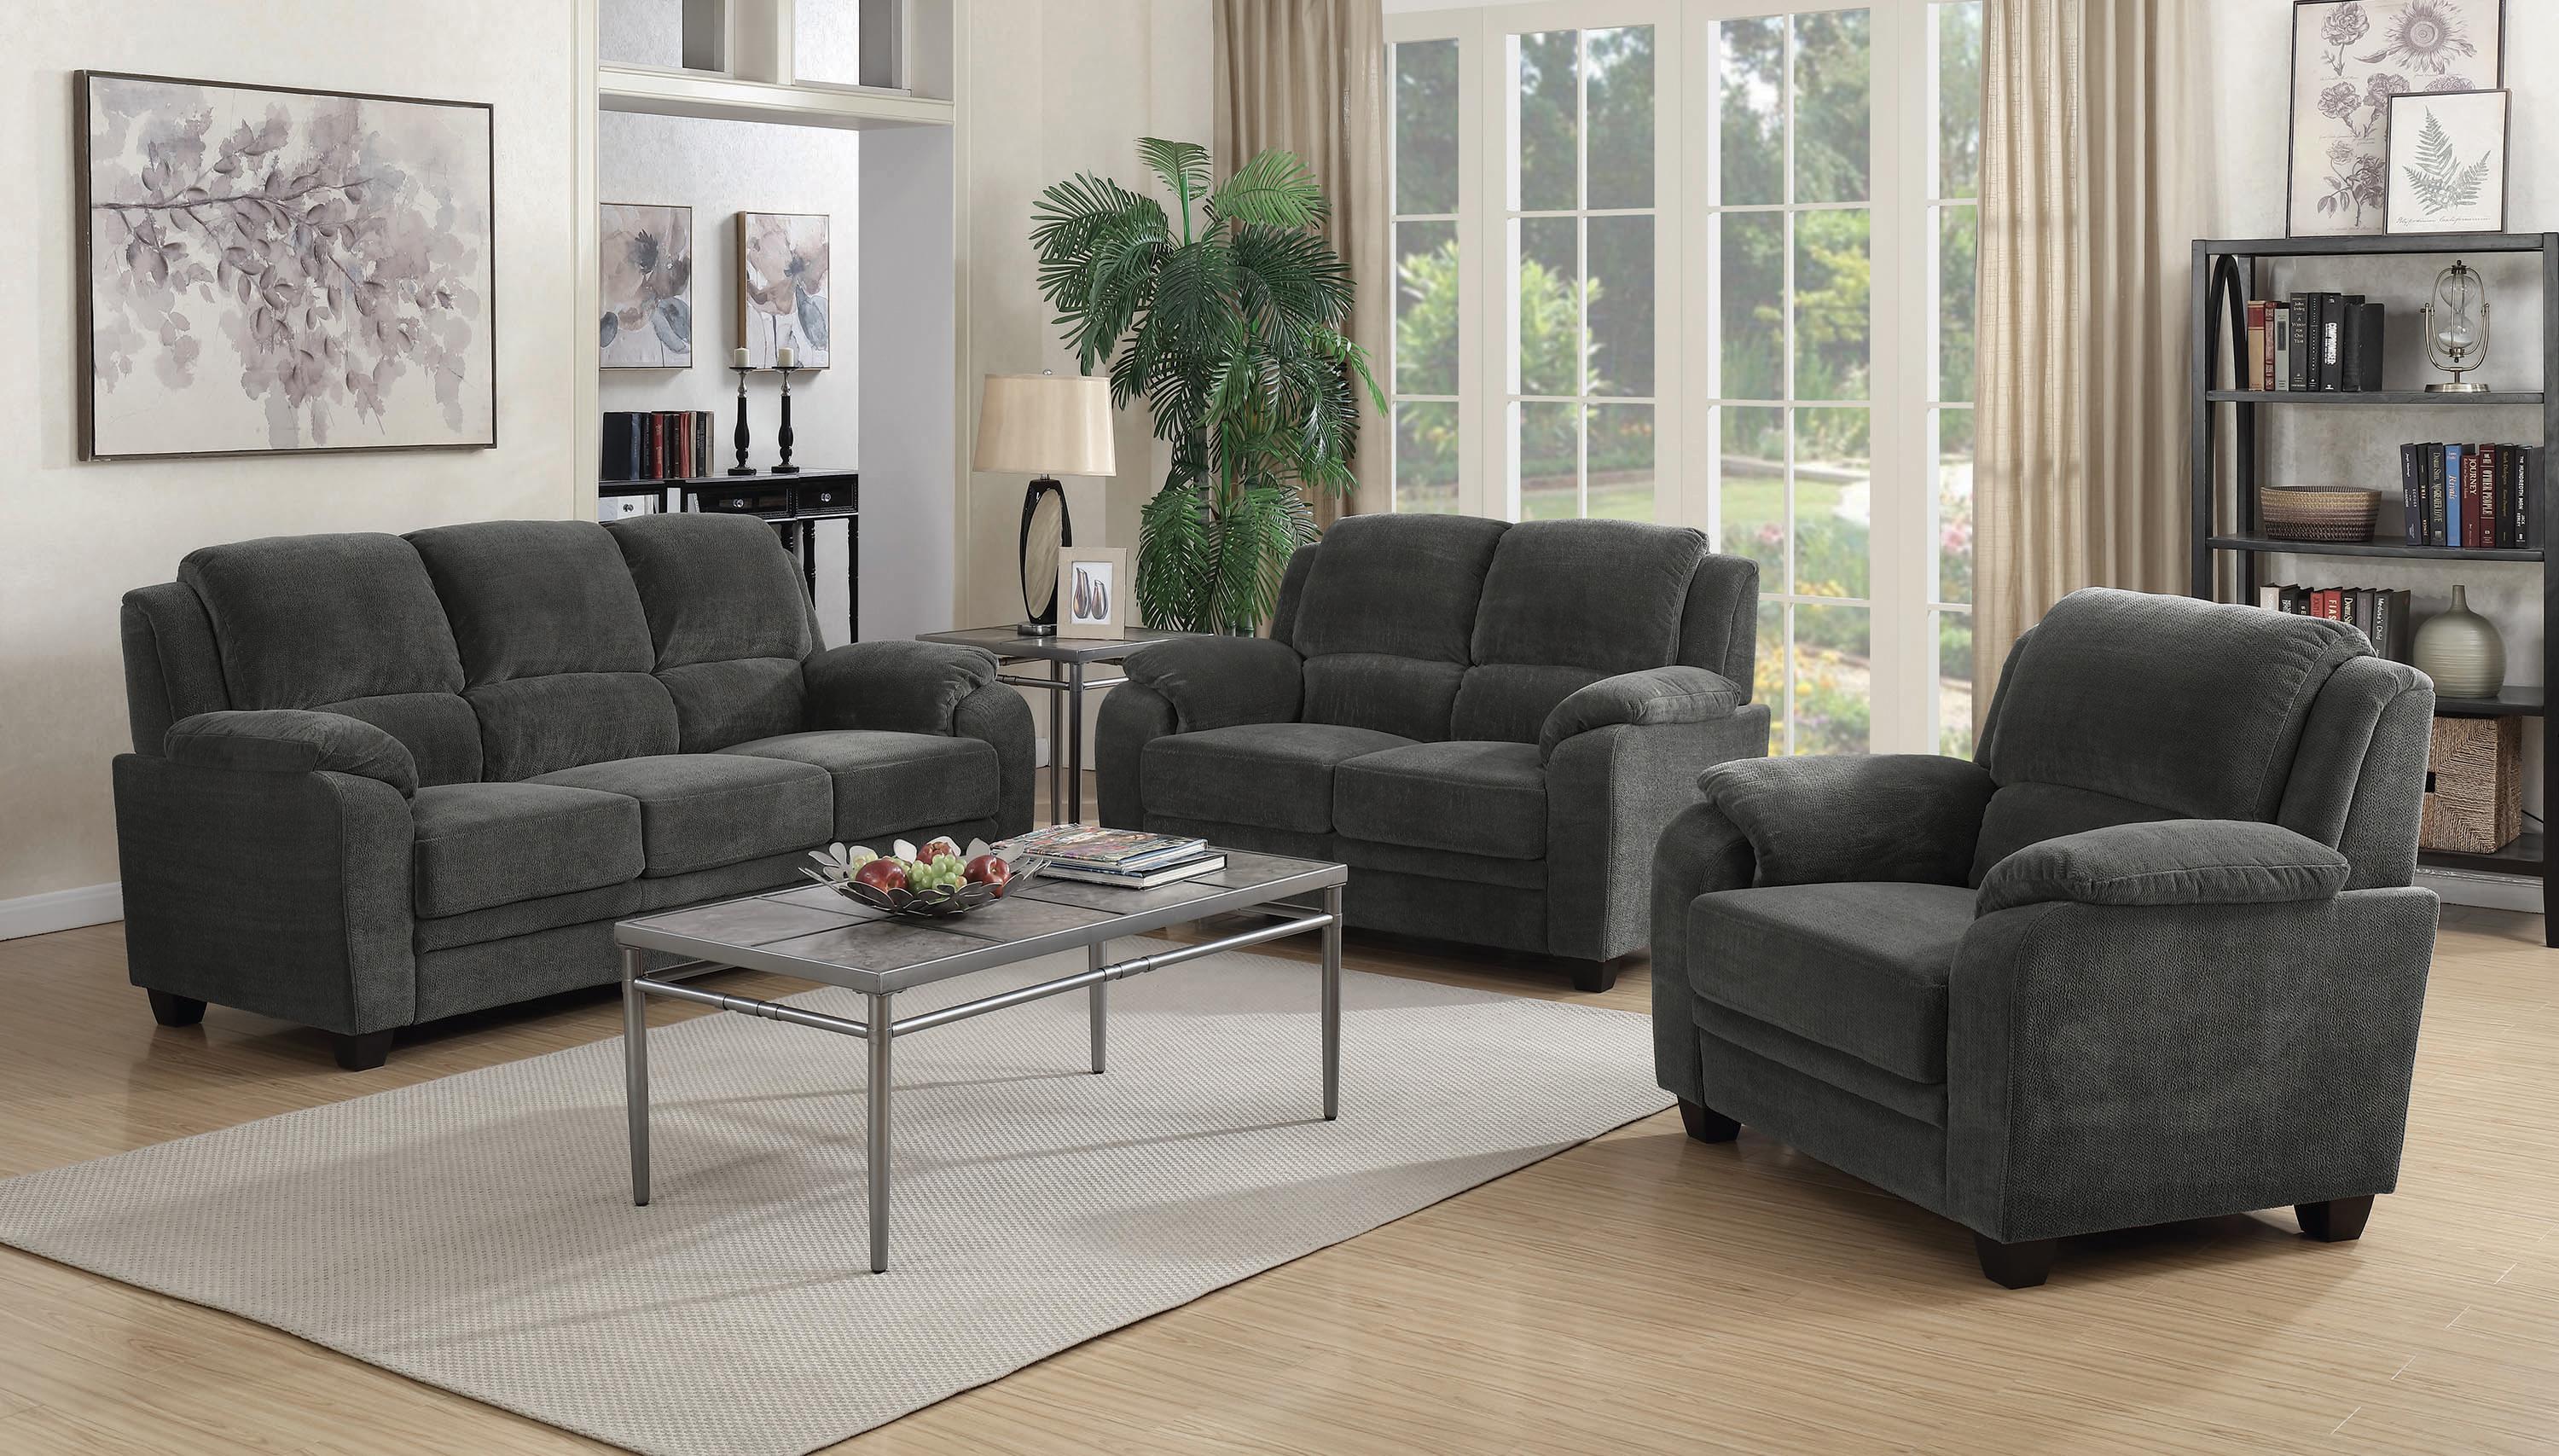 Transitional Living Room Set 506241-S3 Northend 506241-S3 in Charcoal 